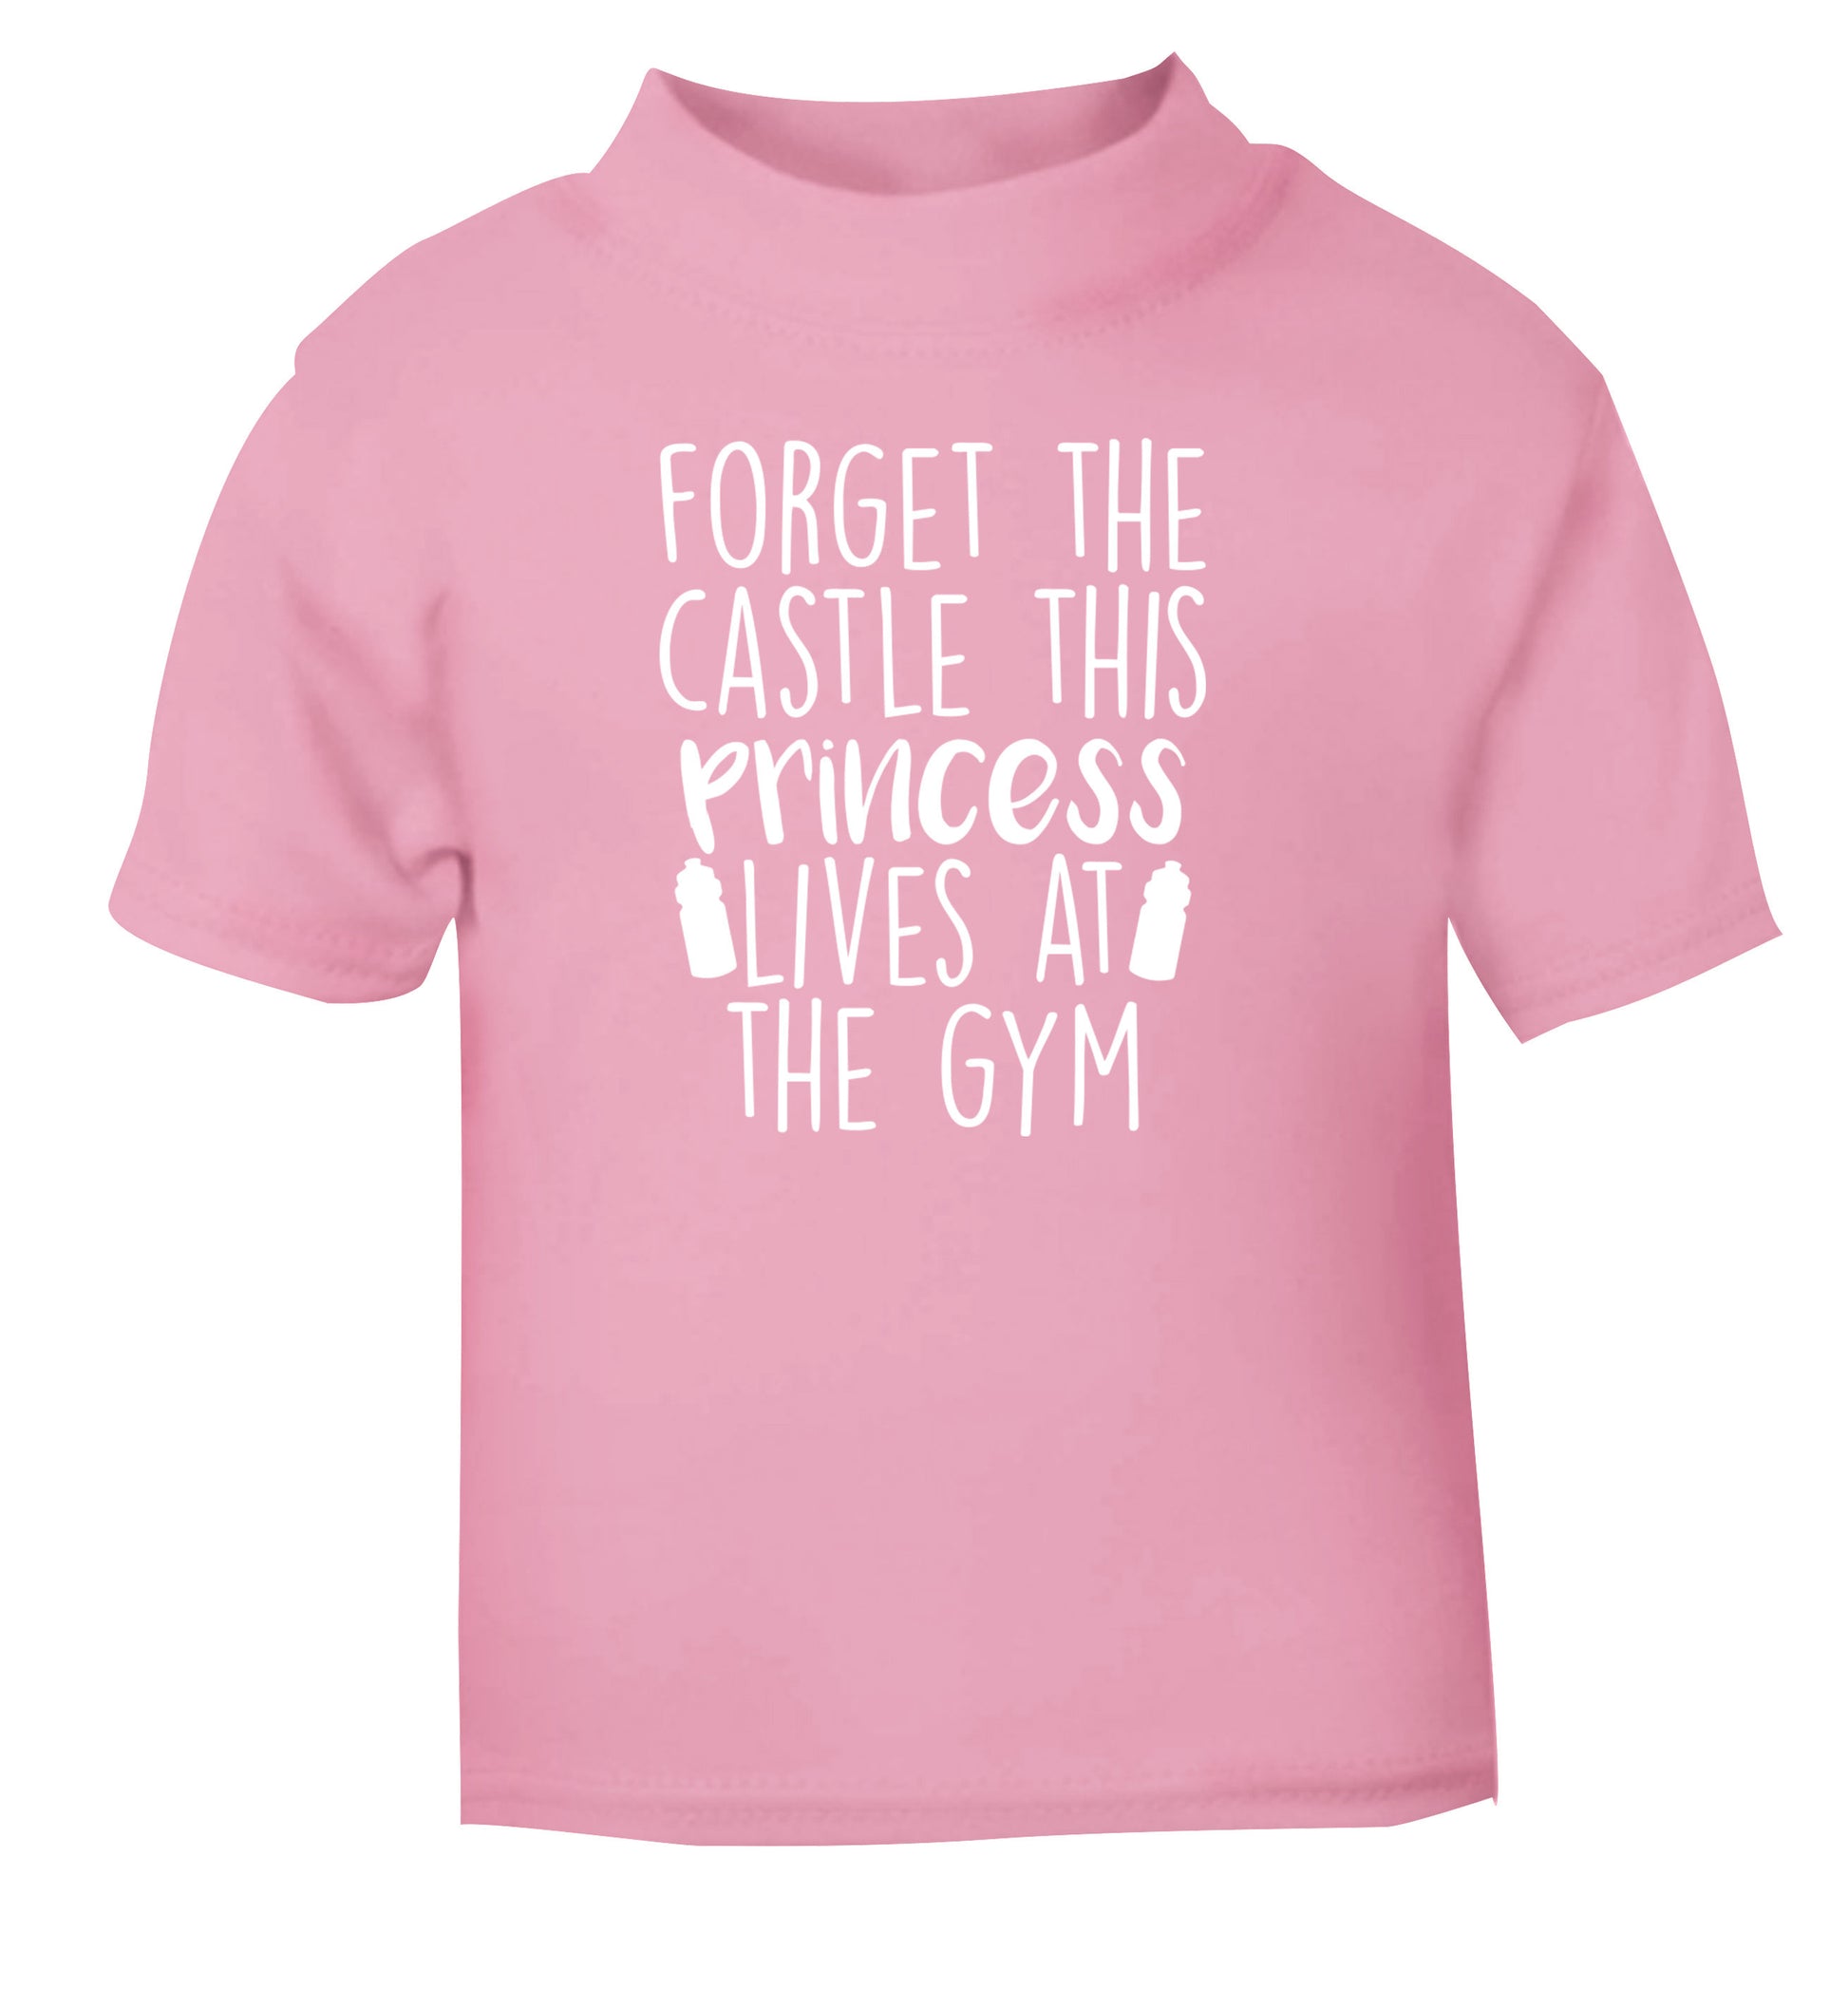 Forget the castle this princess lives at the gym light pink Baby Toddler Tshirt 2 Years